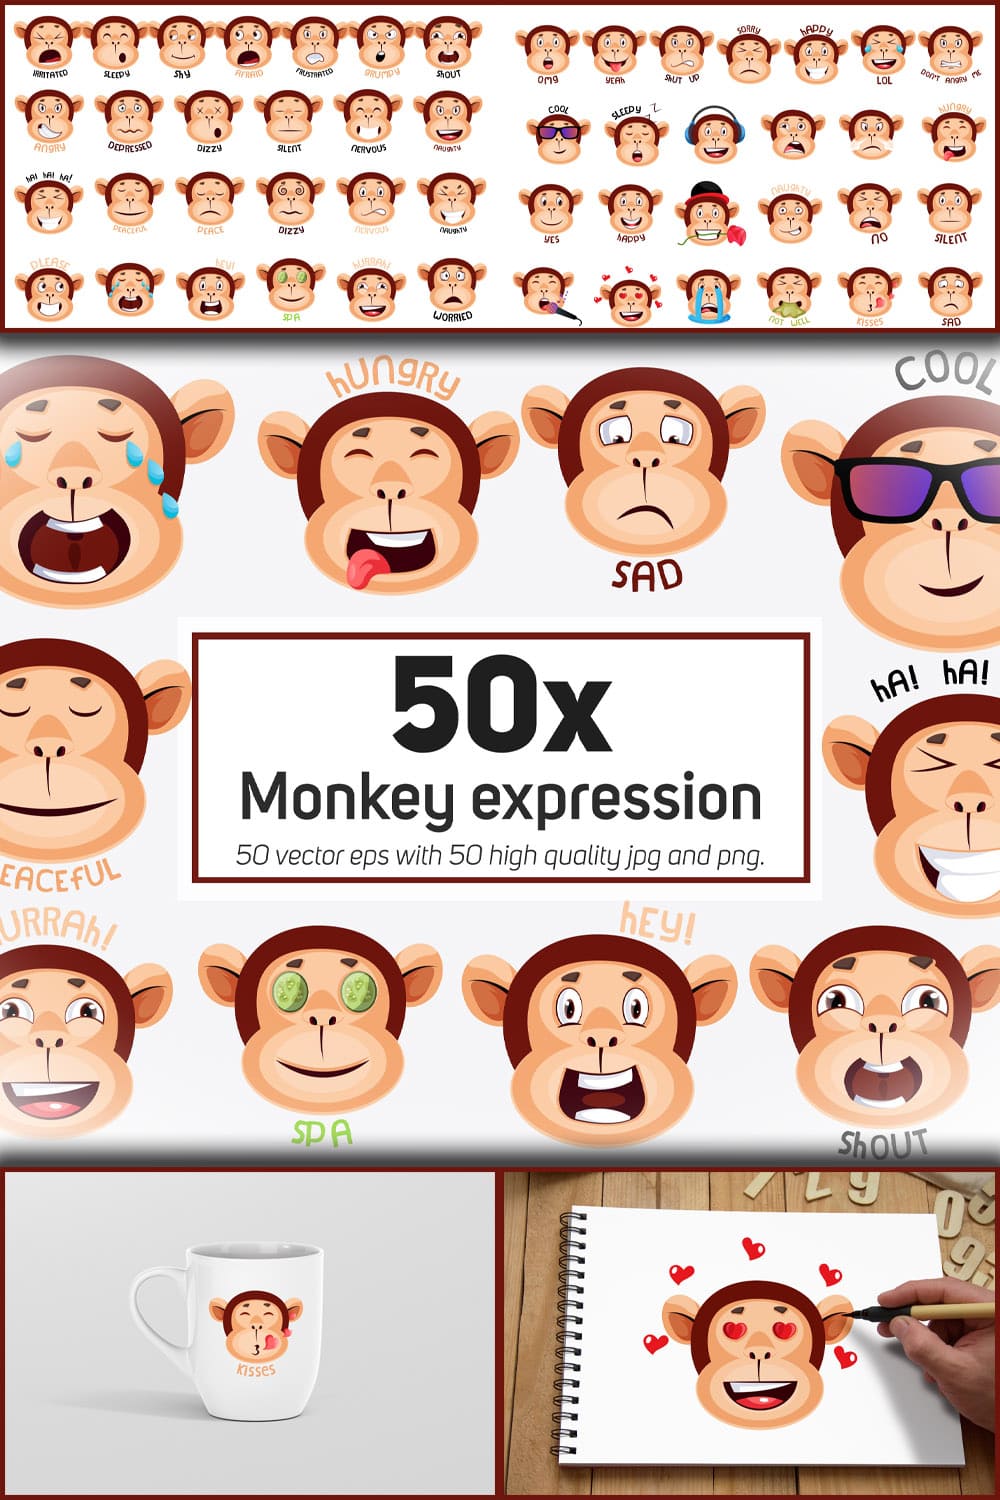 Monkey expression emoticon collection illustrations of pinterest.